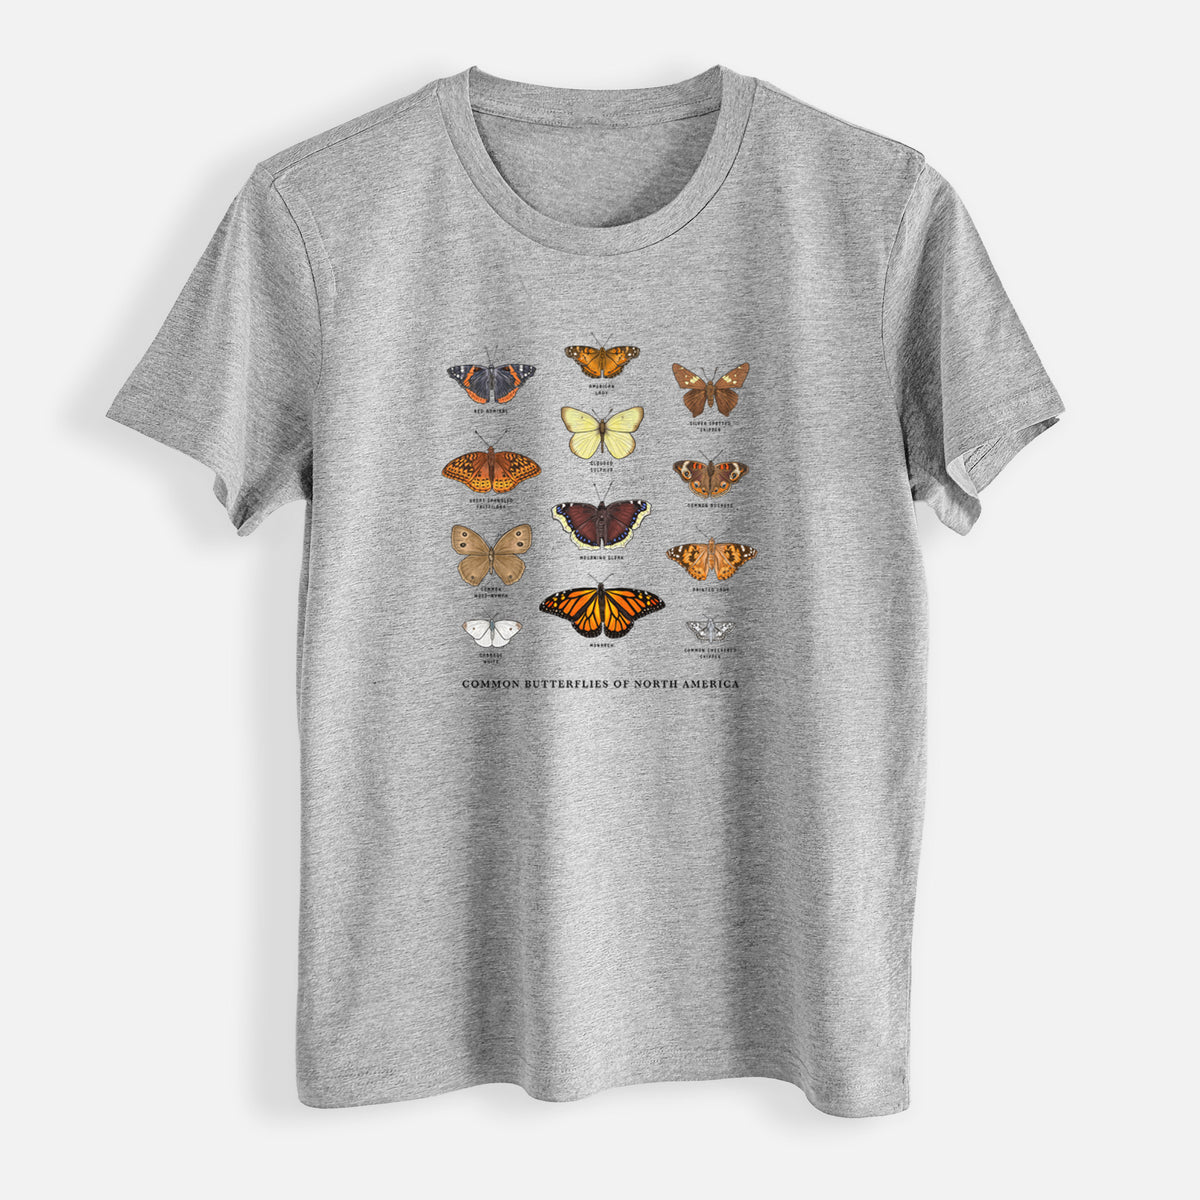 Common Butterflies of North America - Womens Everyday Maple Tee